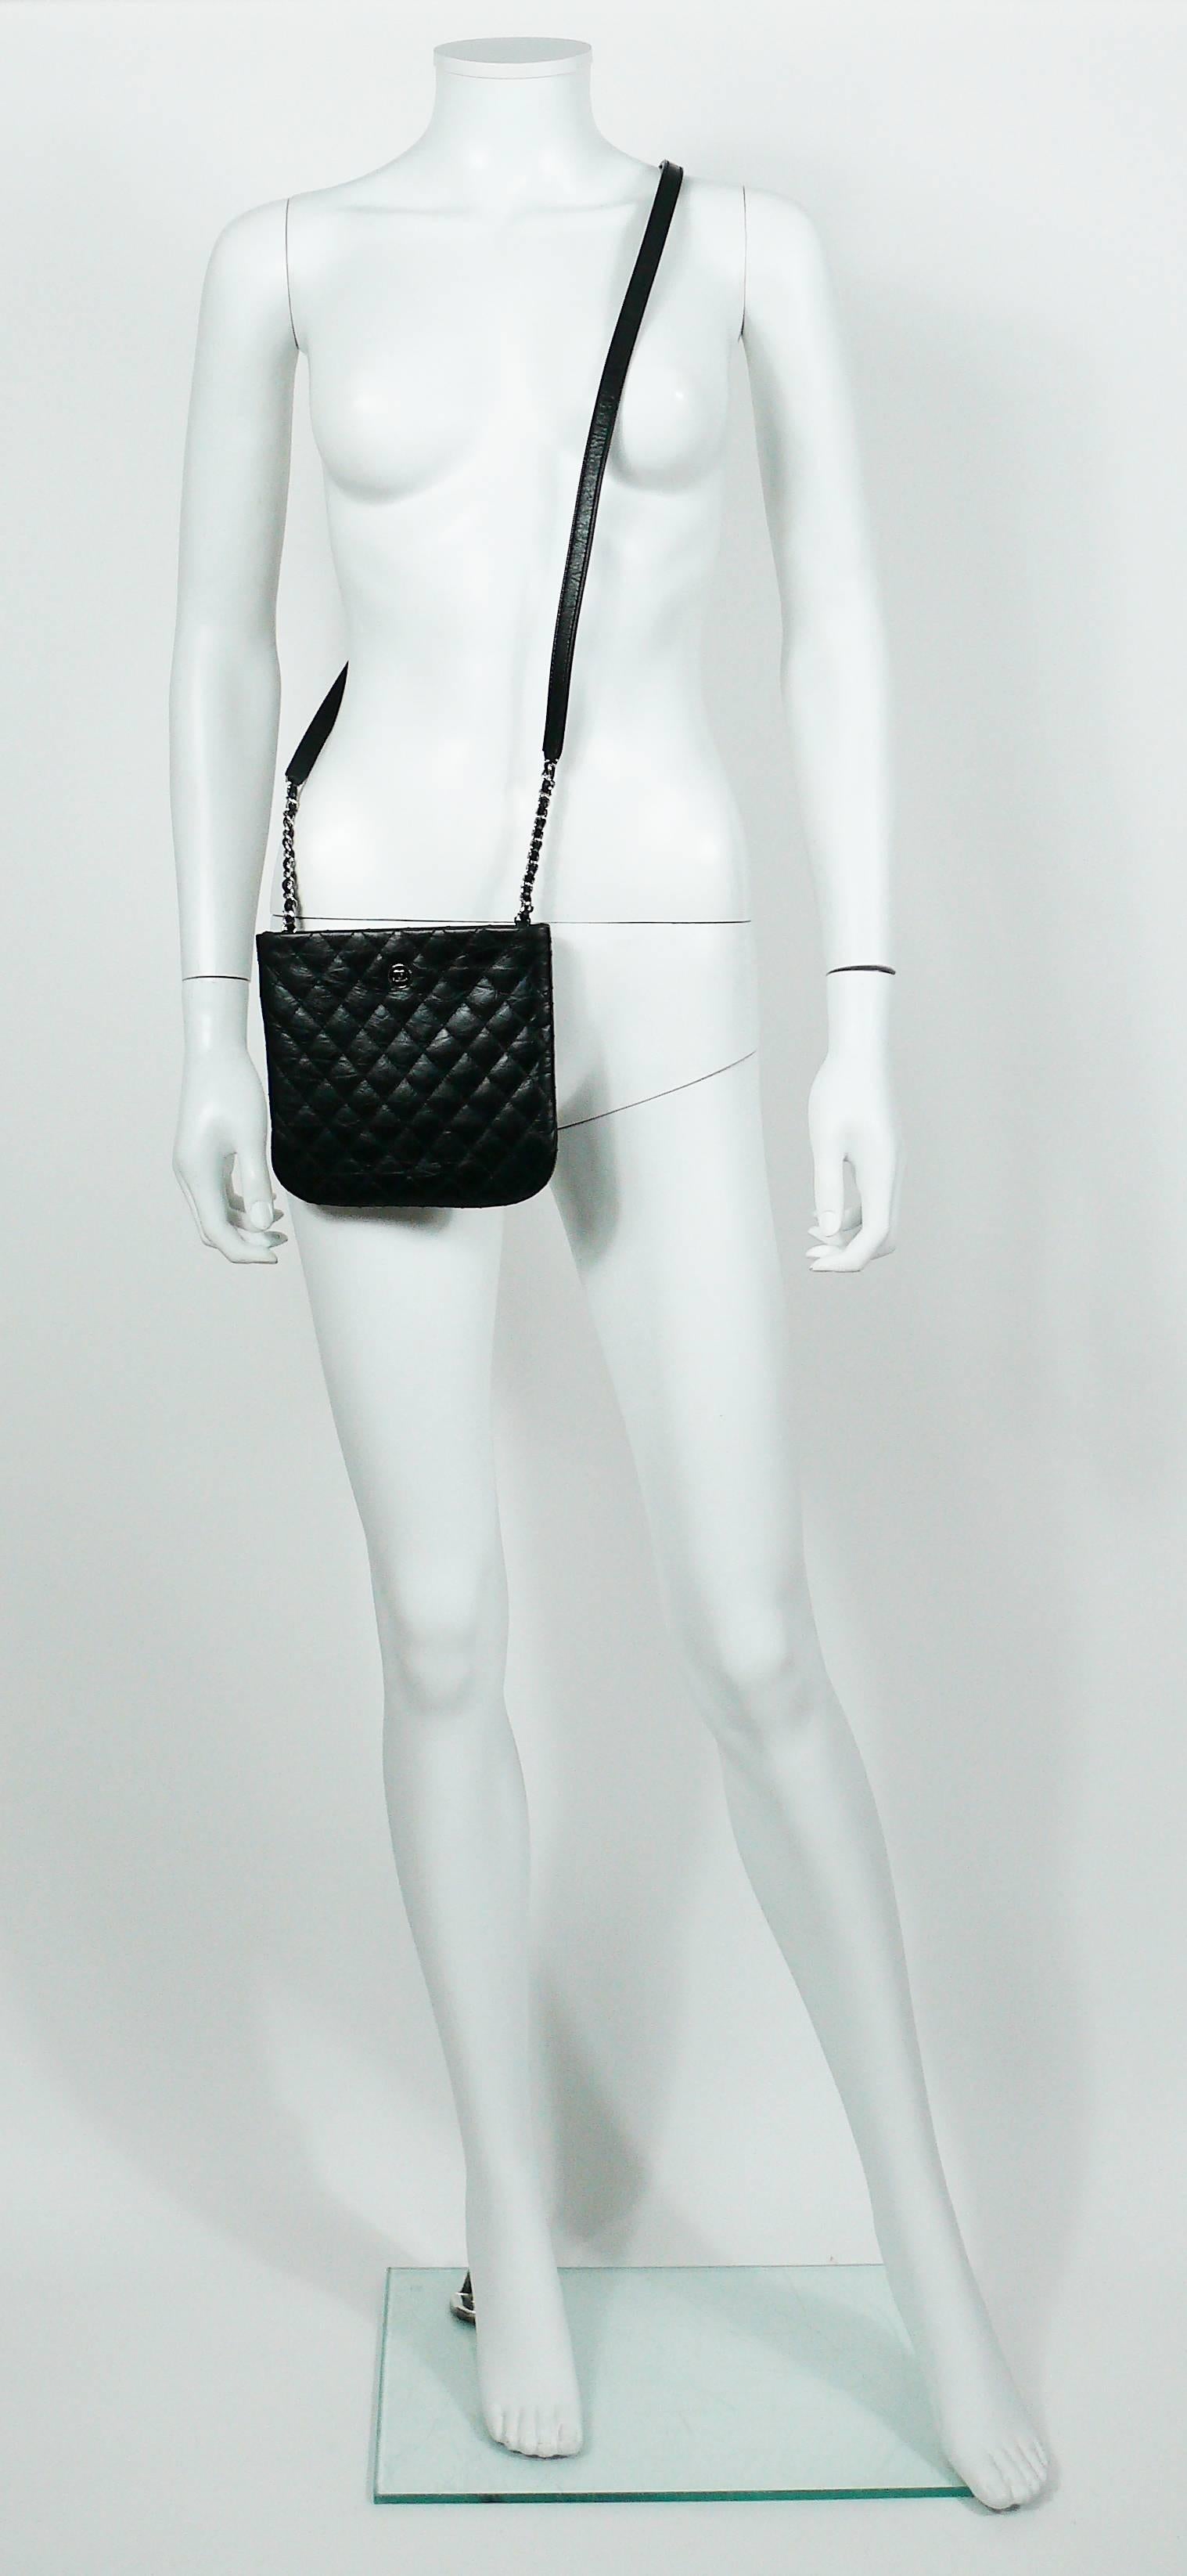 CHANEL UNIFORM quilted black leather crossbody bag.

Please note this item was original part of a CHANEL employee uniform.

This bag features :
- Quilted black leather exterior.
- Silver toned with black enamel coin detail with CC logo.
- Silver